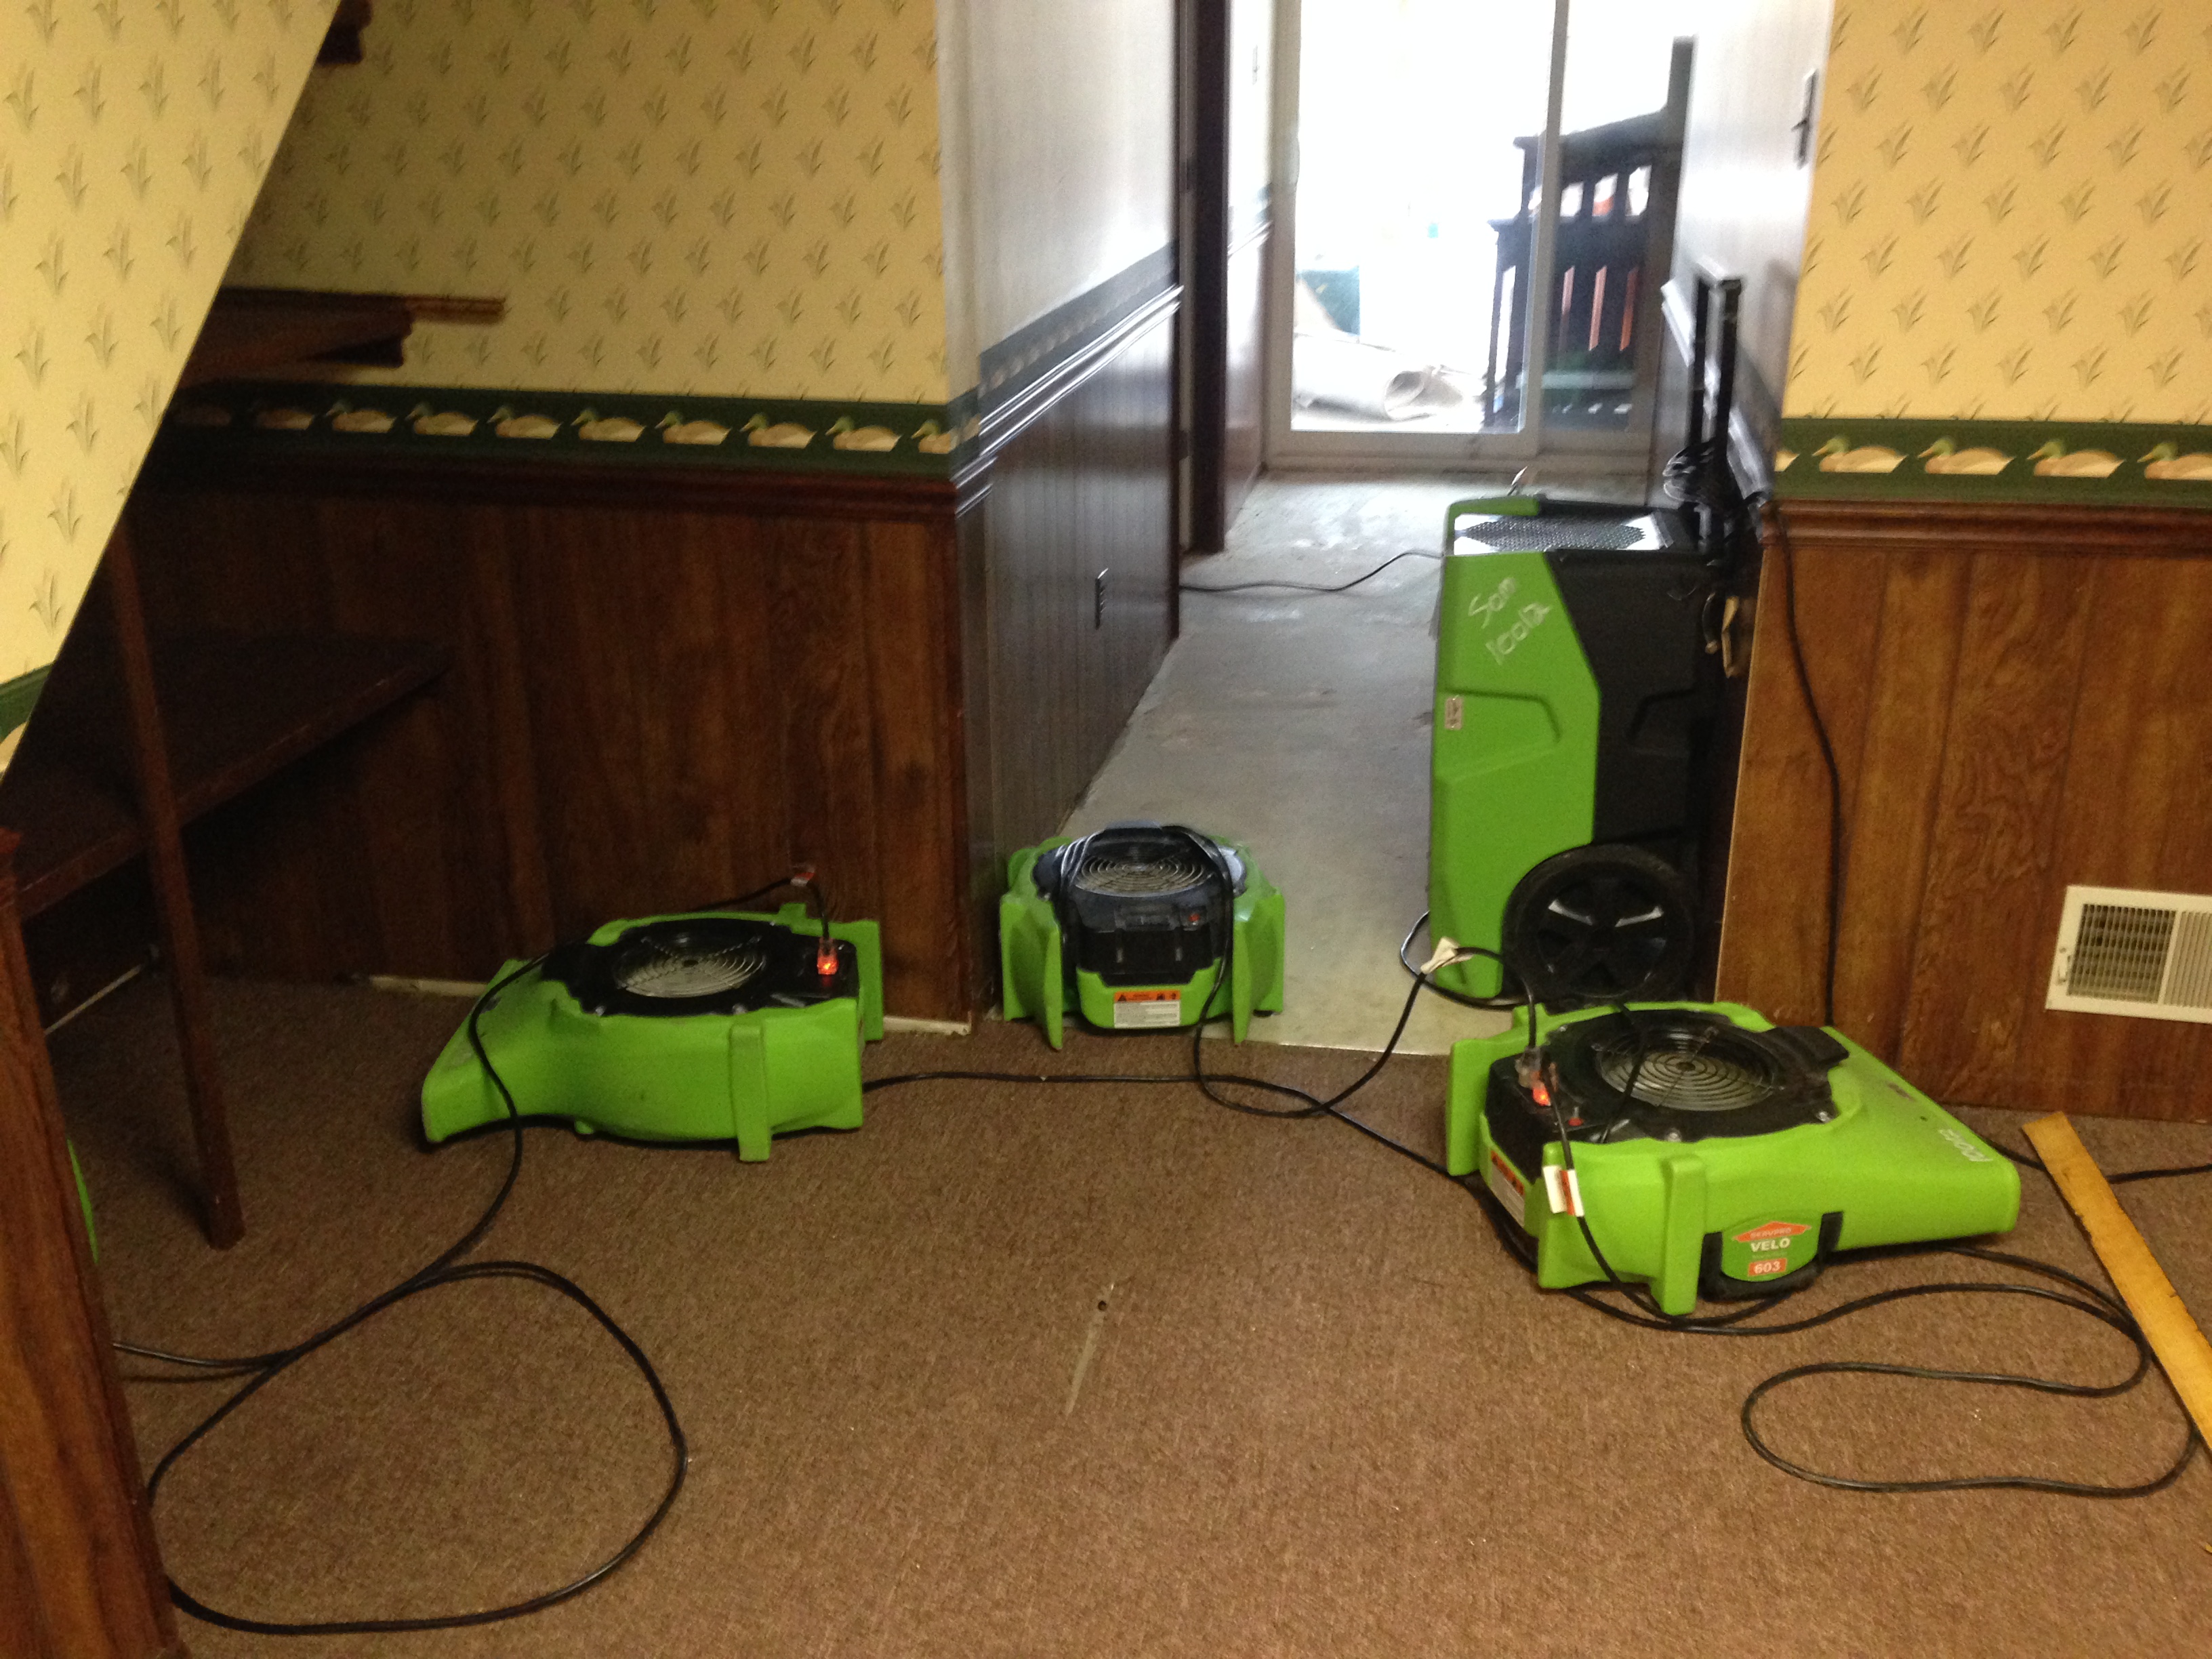 Water loss in your home? No problem for SERVPRO. We&#39;re on standby 24/7 to help with any size loss.